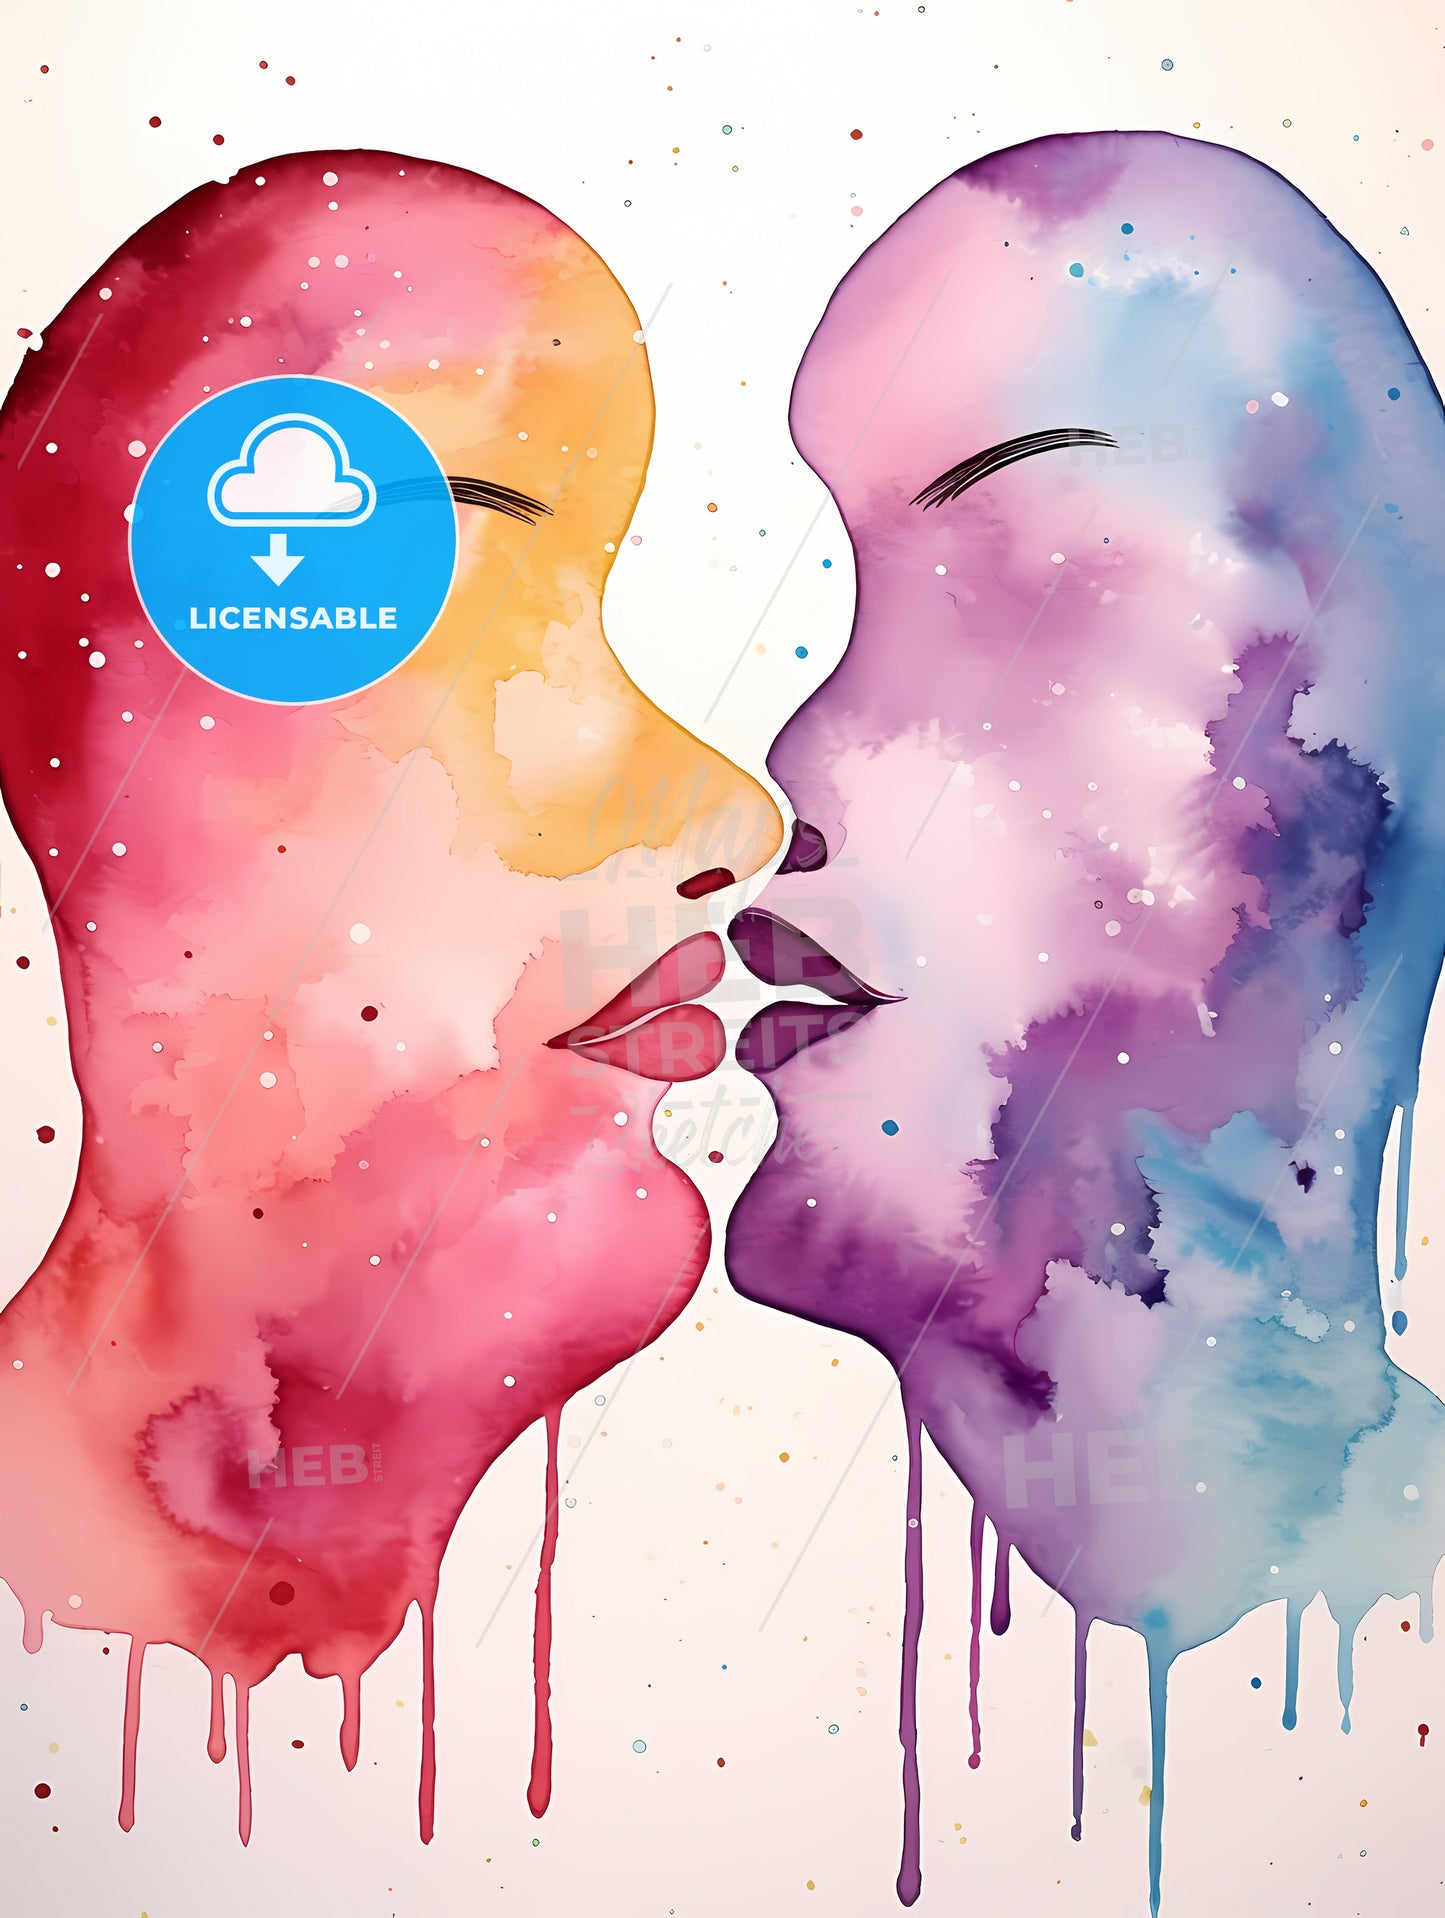 The Kiss 1 - A Watercolor Of Two Faces